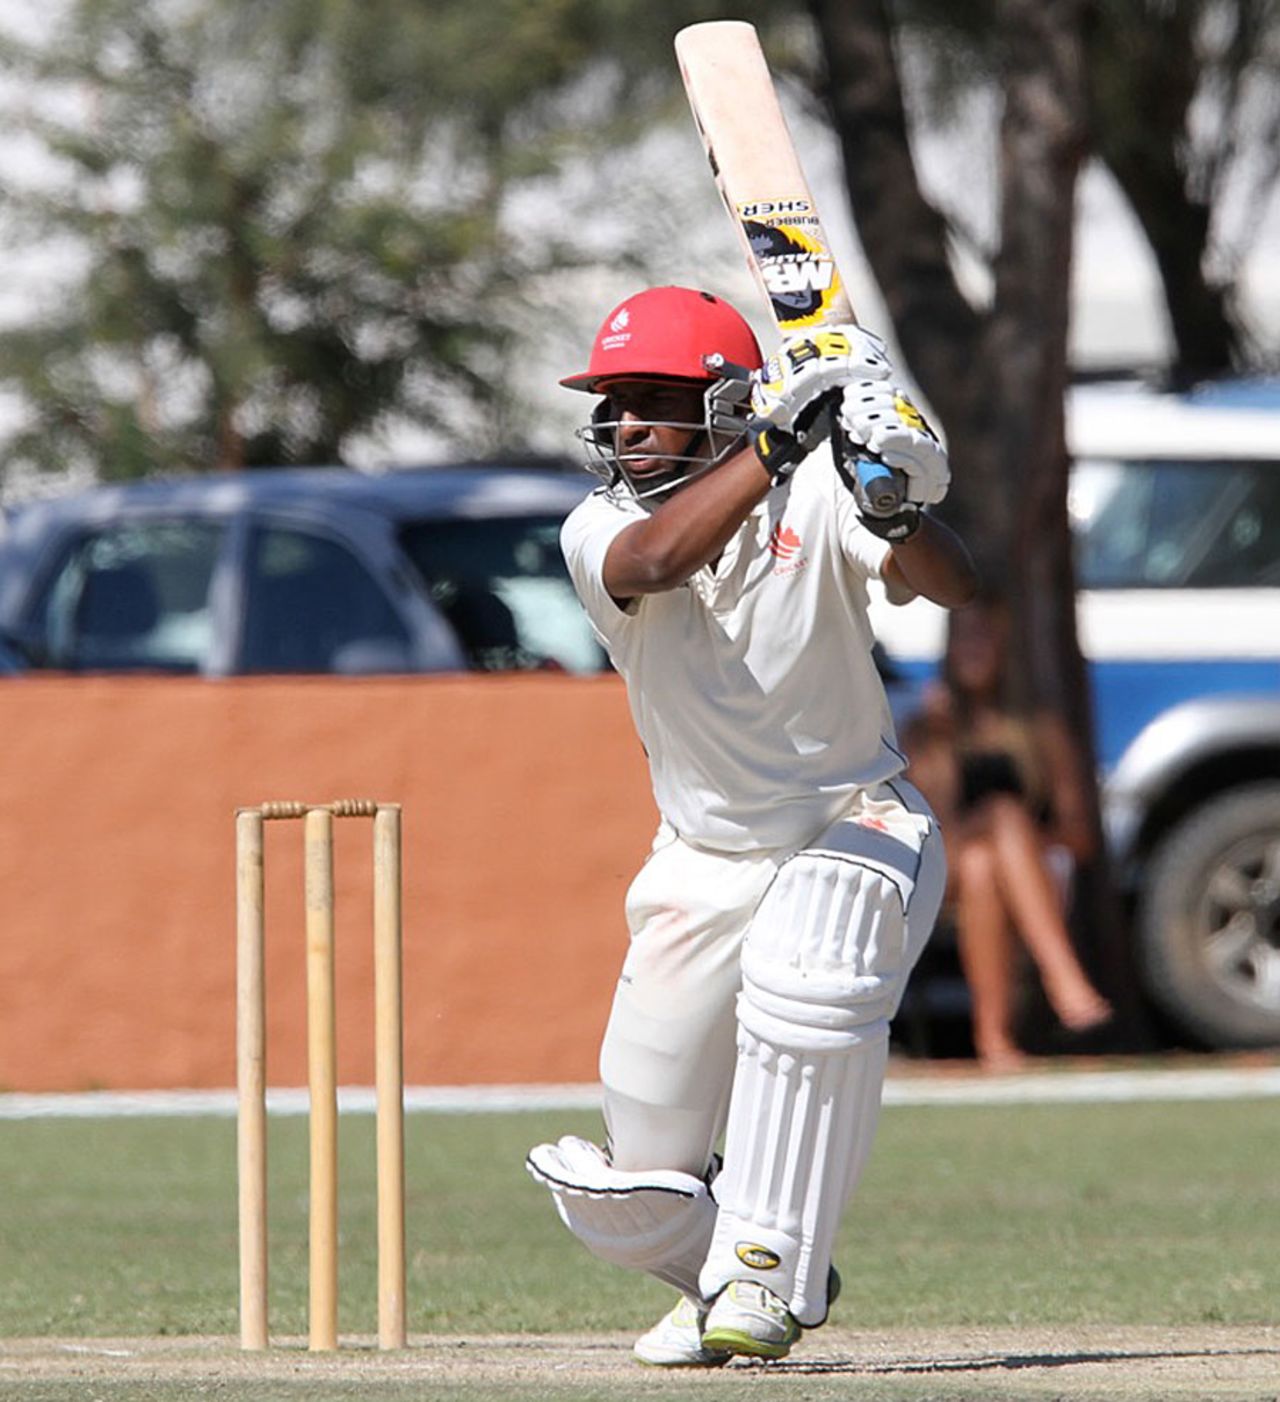 Zeeshan Siddiqi drives during his unbeaten 73, Namibia v Canada, ICC Intercontinental Cup, Windhoek, 4th day, April 8, 2012